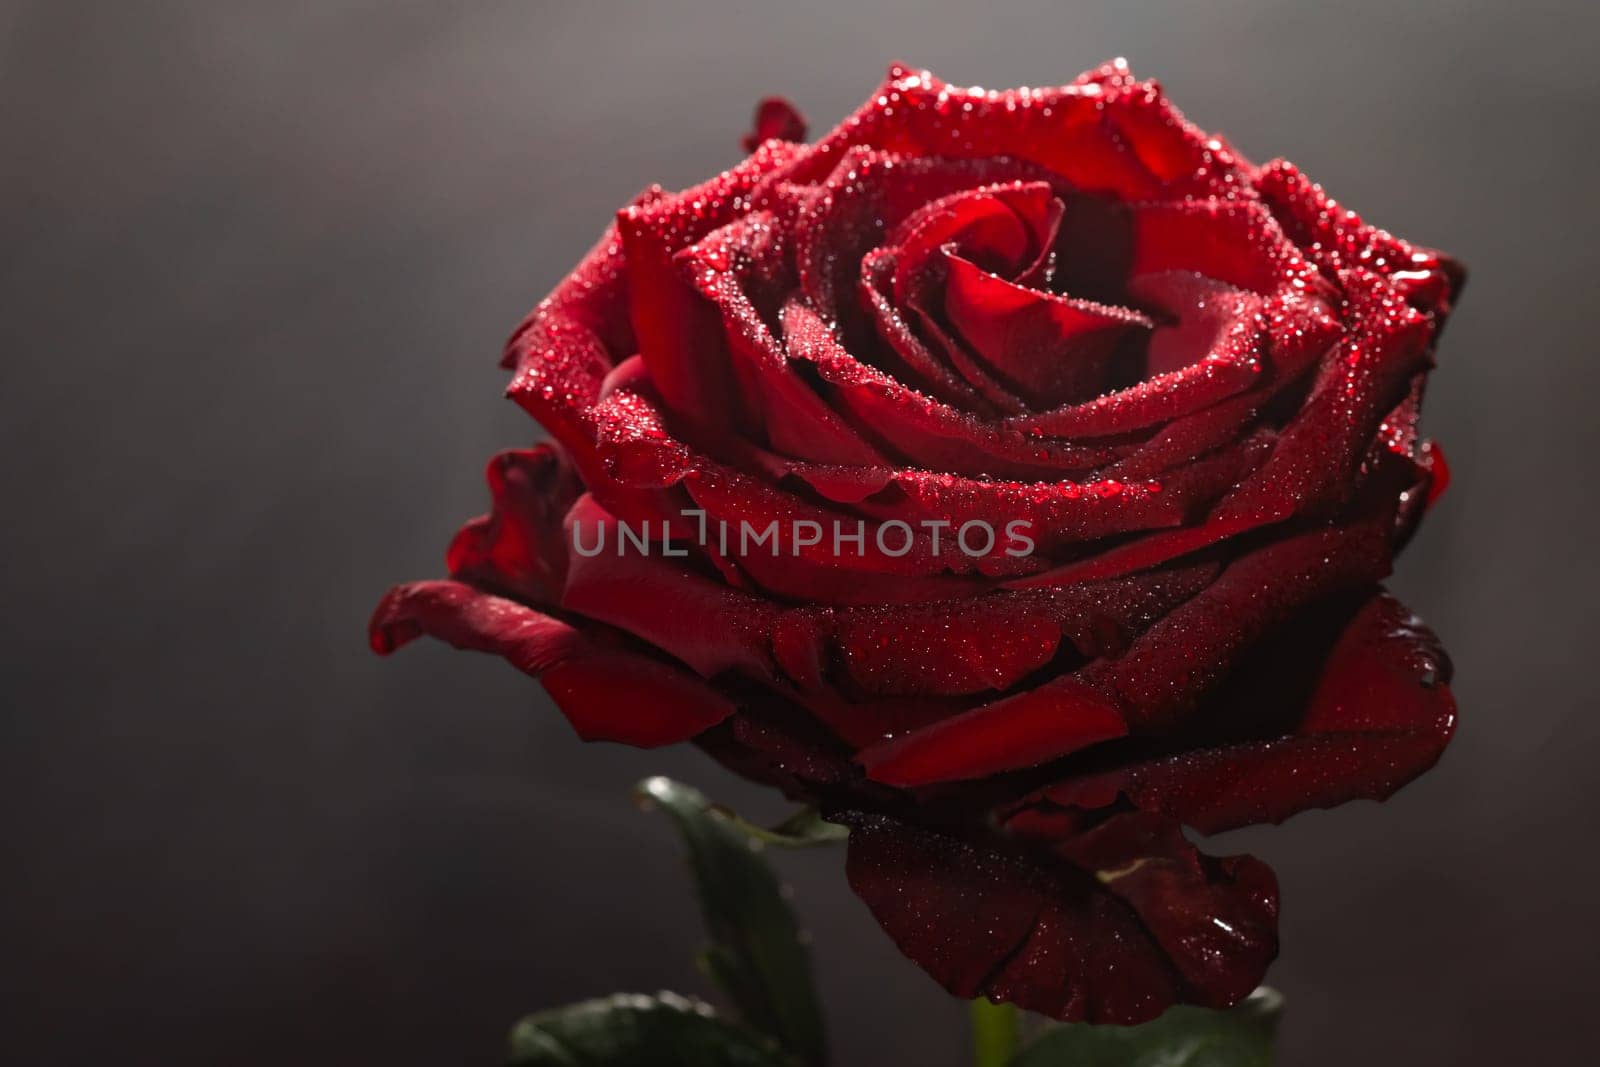 Blooming red rose bud in water drops and mist close-up on a black background by glavbooh